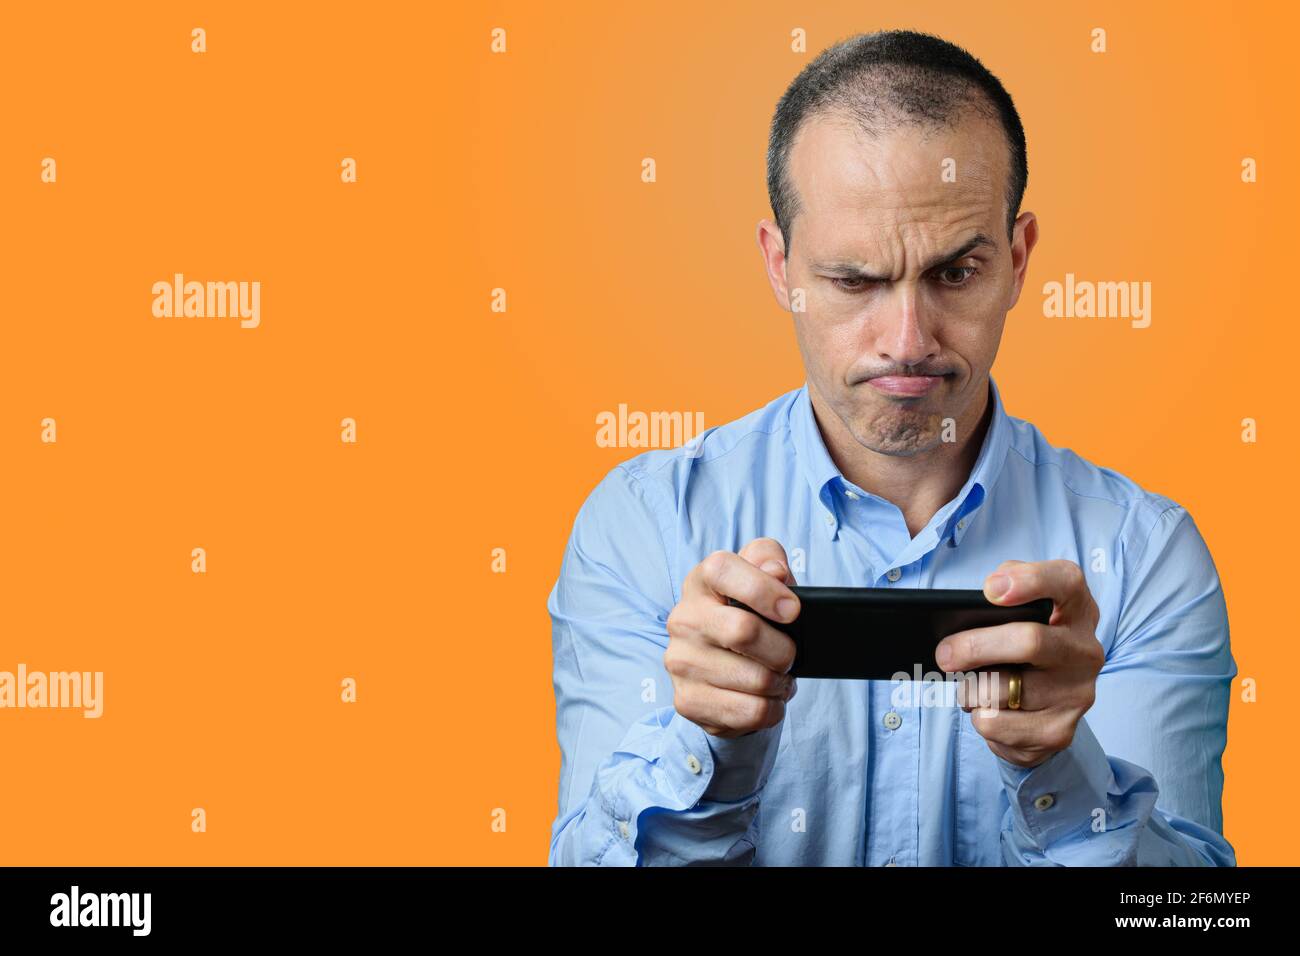 Mature man in formal wear looking at his smartphone and biting his upper lip. Orange background. Stock Photo